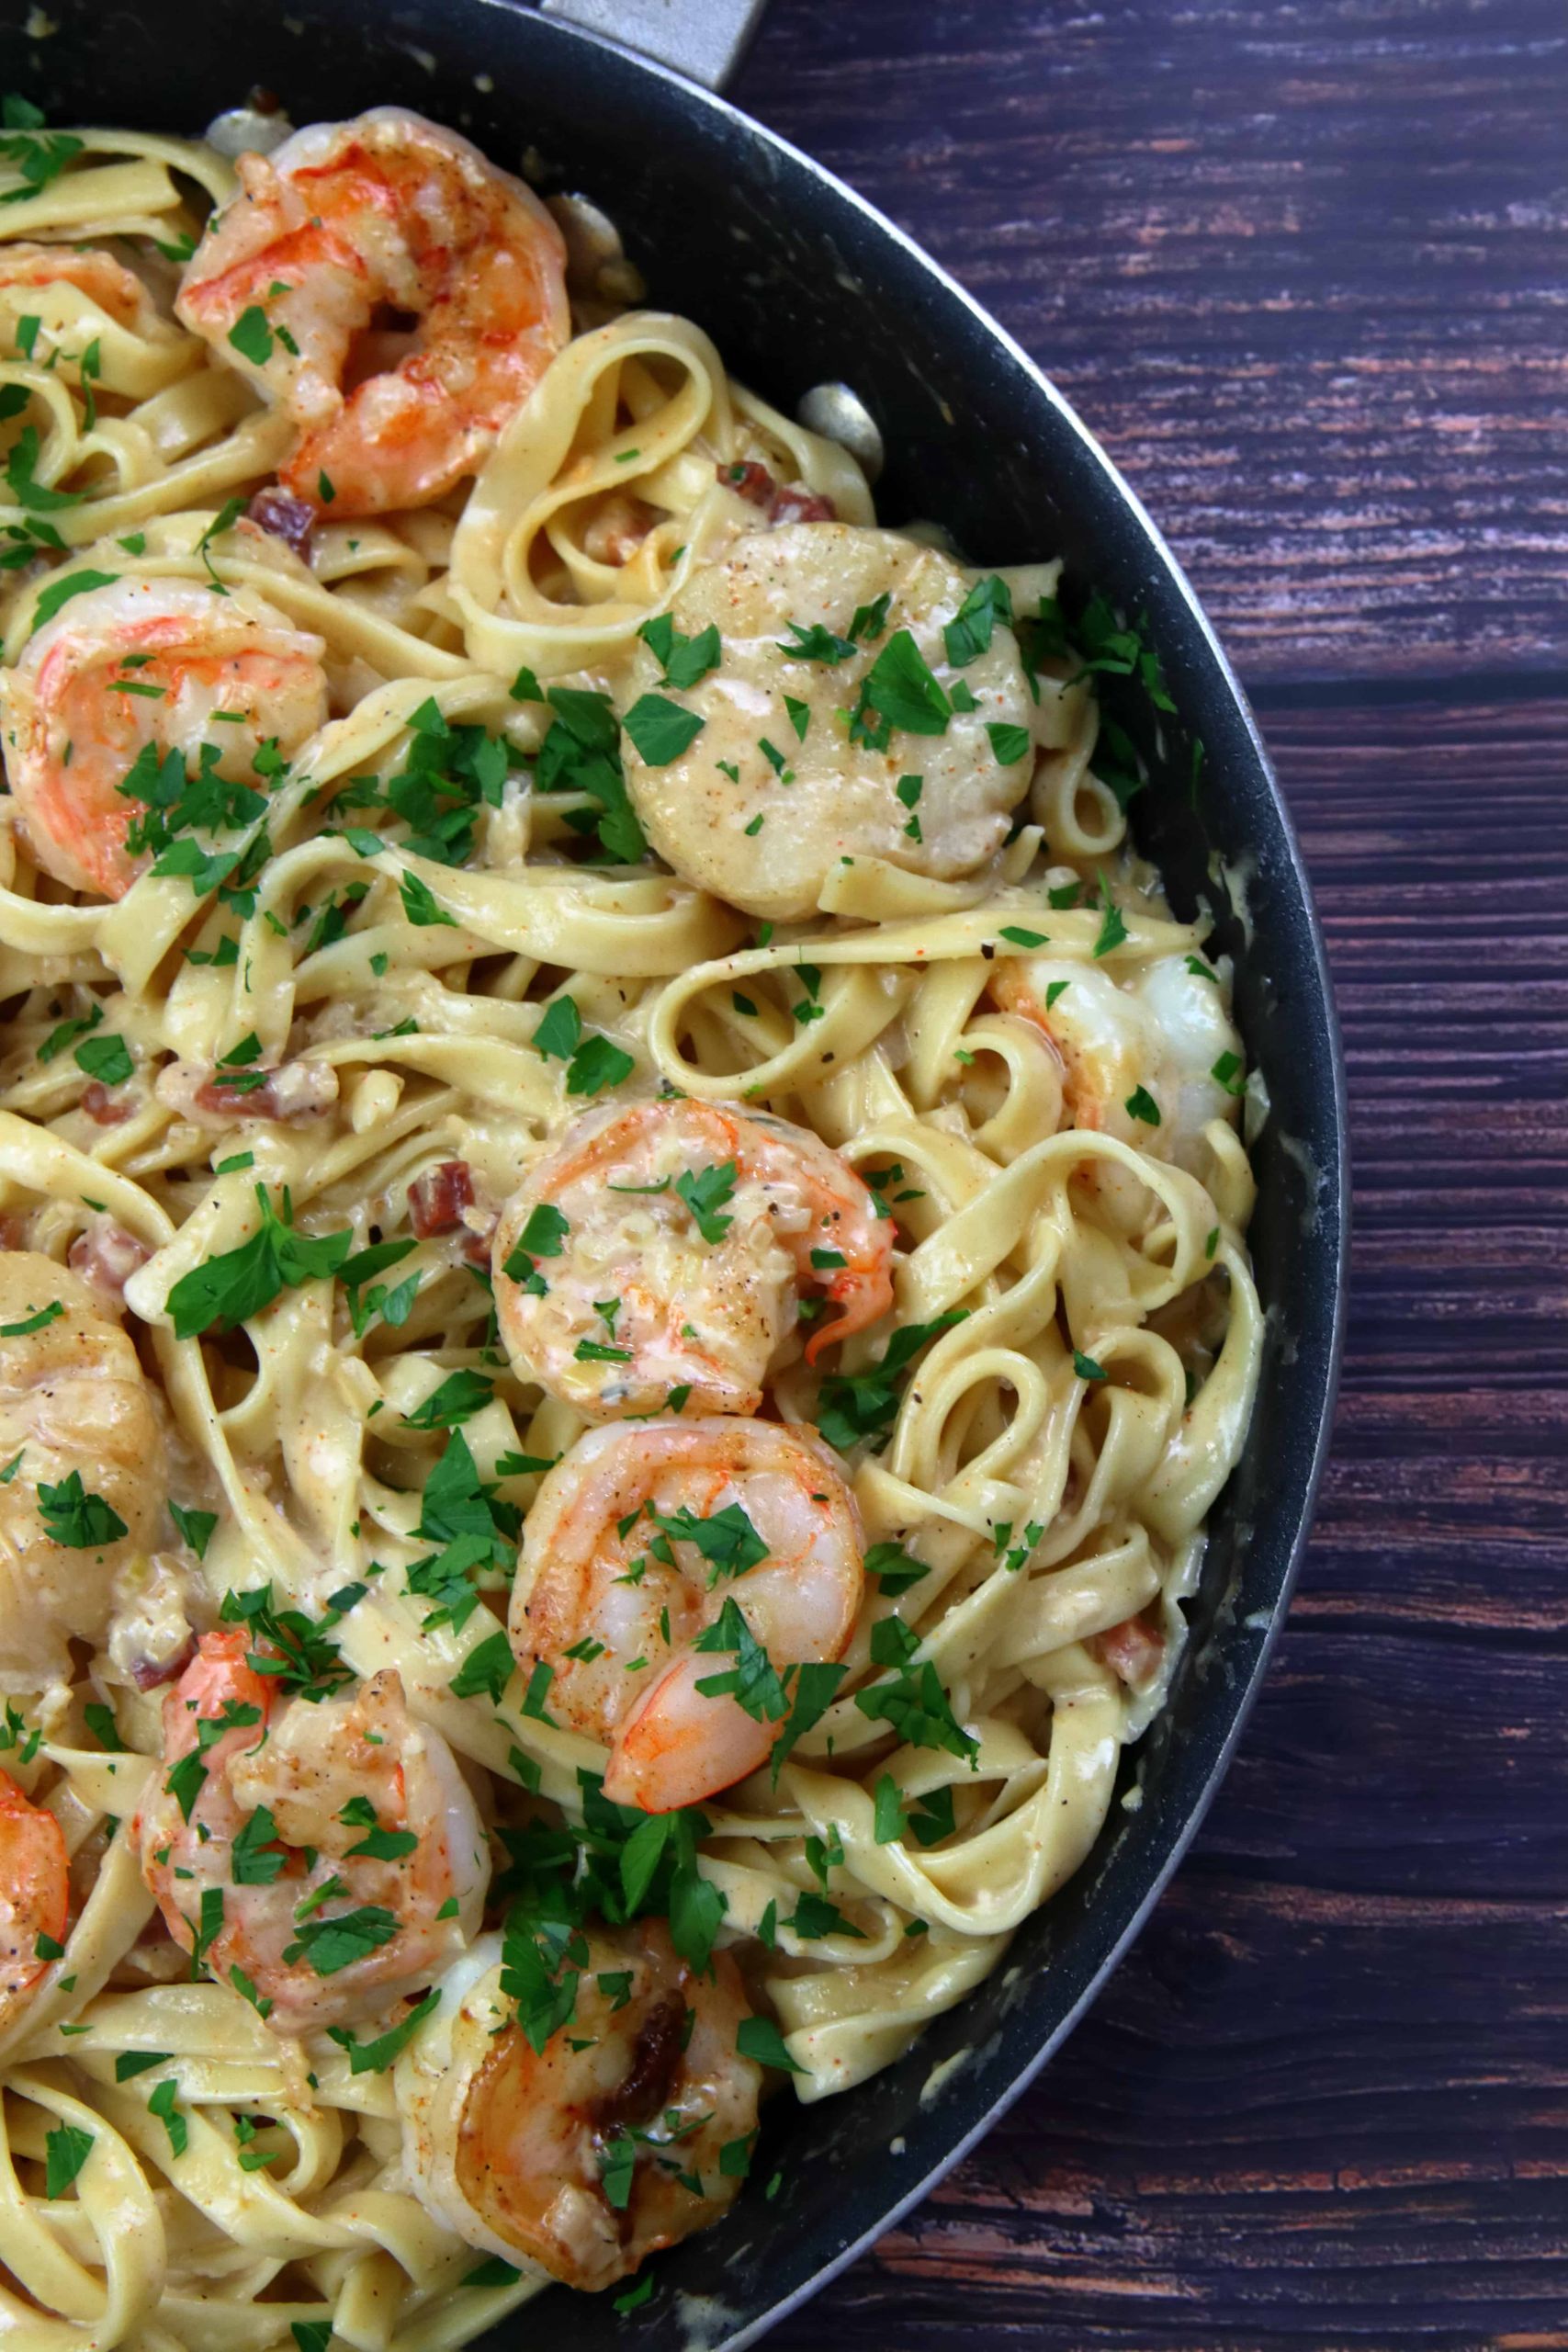 Shrimp and Scallop Pasta with White Wine Sauce Awesome Shrimp and Scallop Pasta In White Wine Cream Sauce